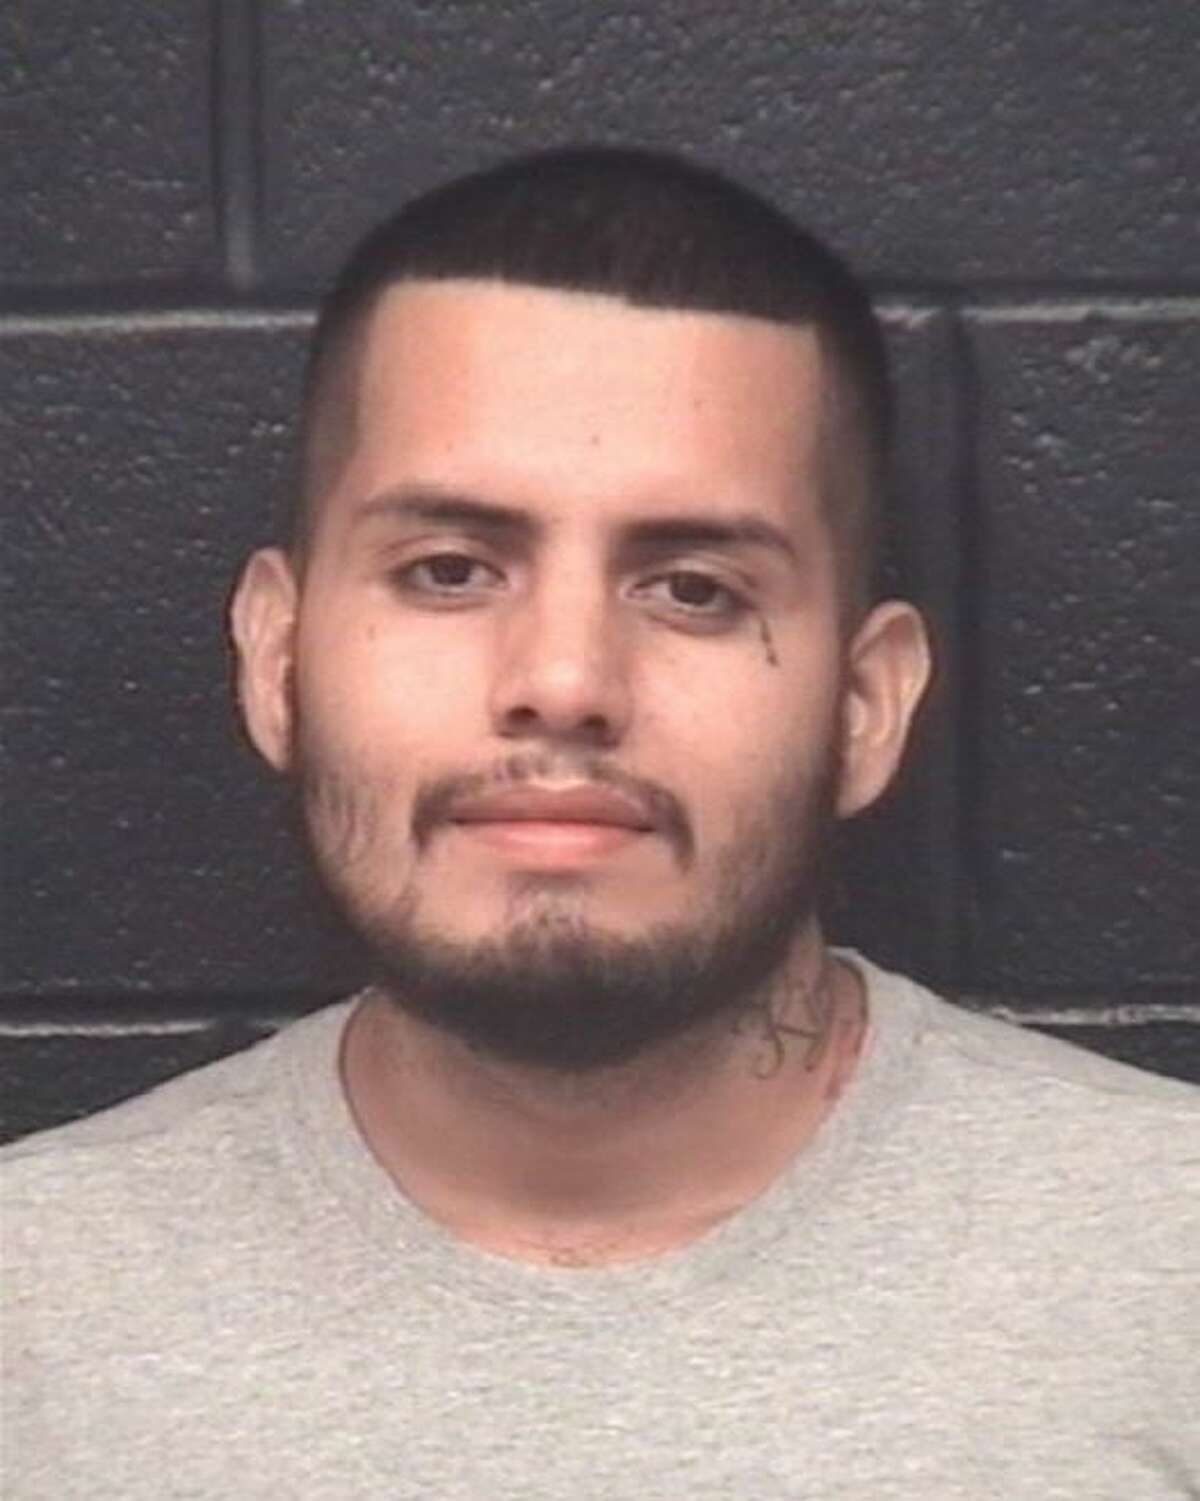 Juan Andres Melendez, 26, was charged with possession of marijuana.